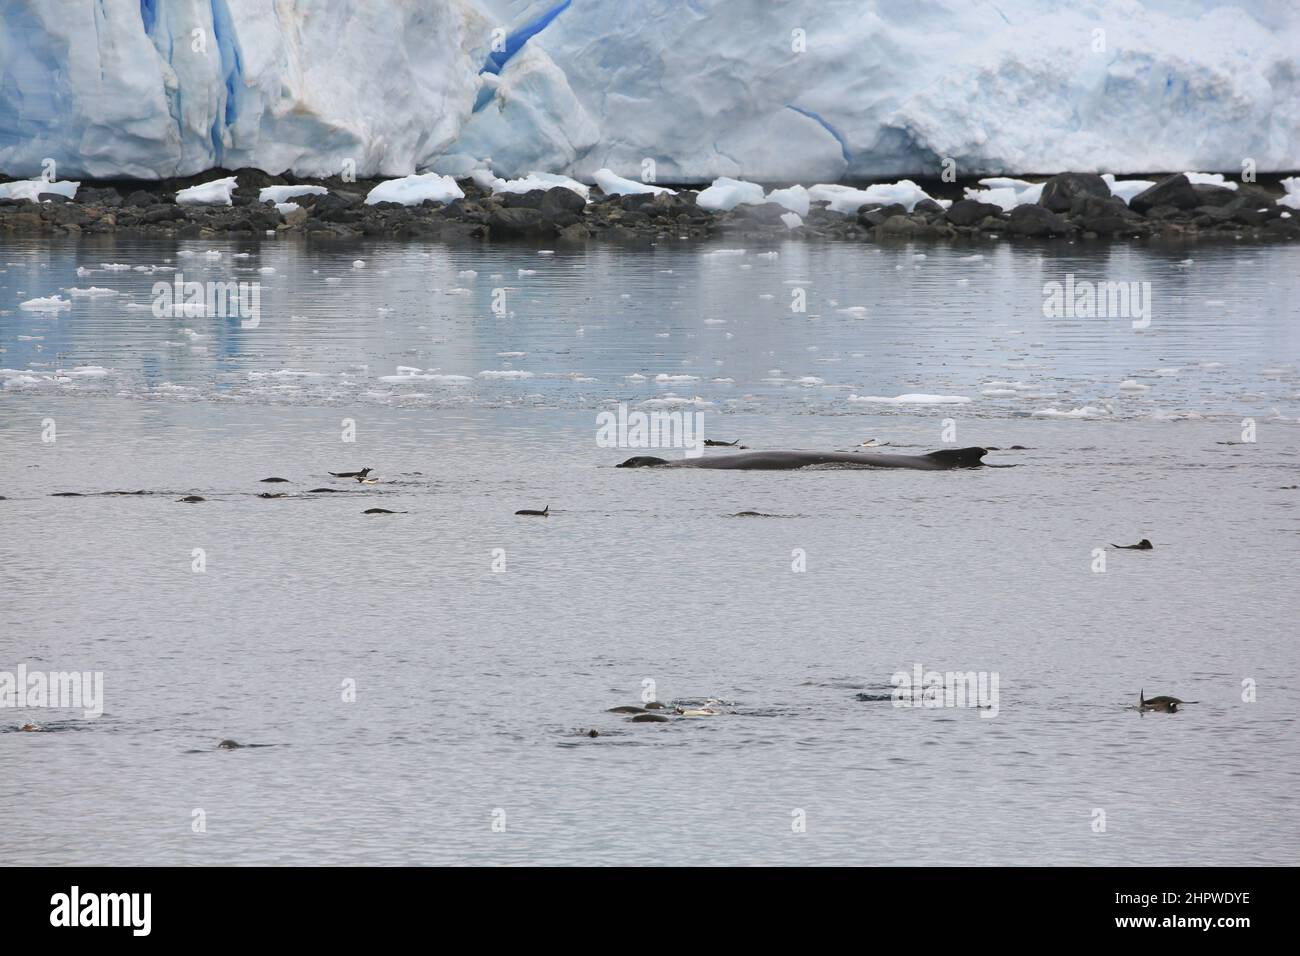 A humpback whale swimming next to Gentoo penguins in the passage east of Lemaire Island, Antarctica. Stock Photo